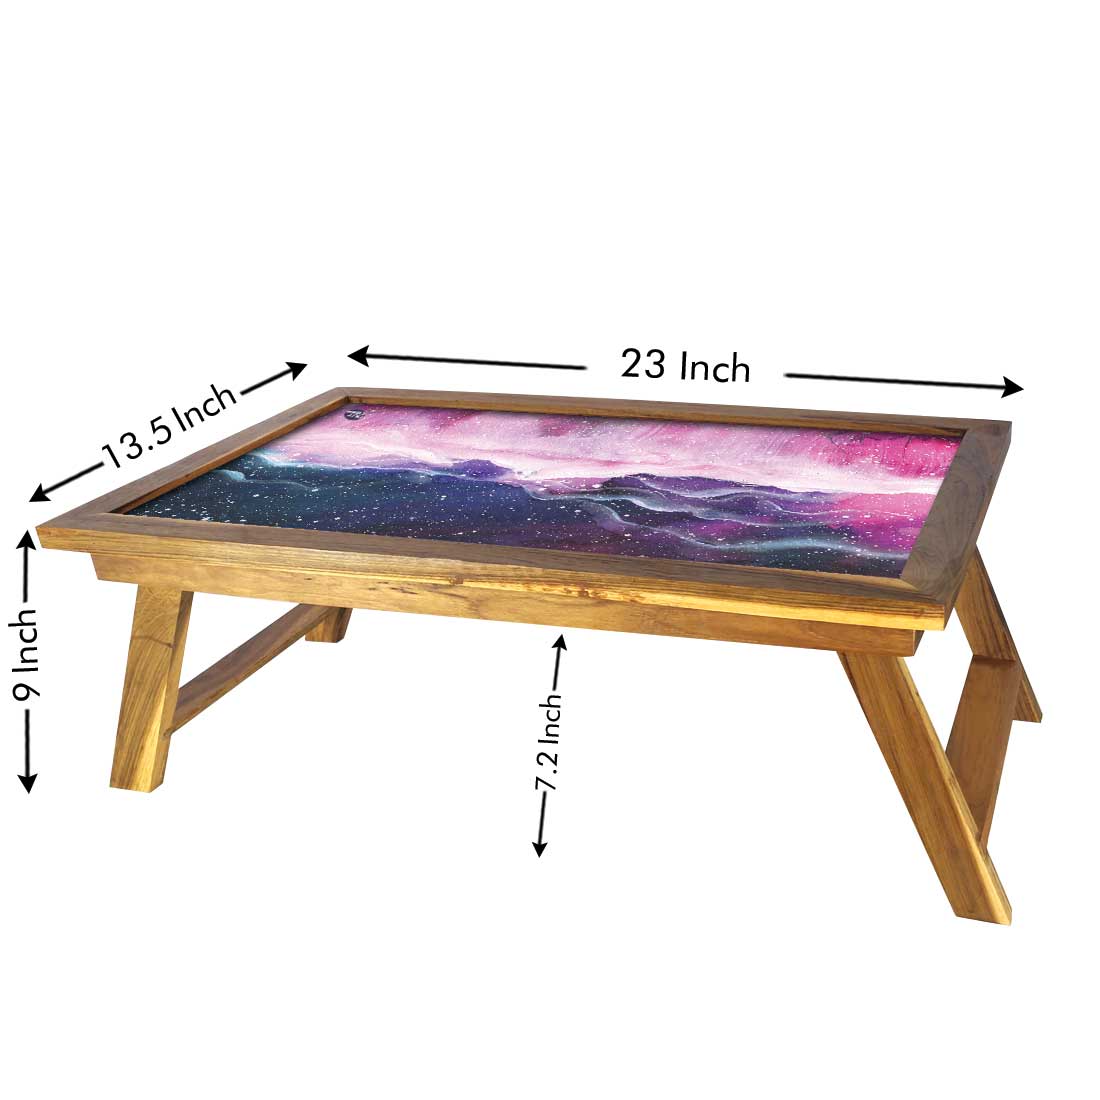 Wooden Laptop Bed Tray Desk for Home Breakfast Table - Space Colorful Nutcase